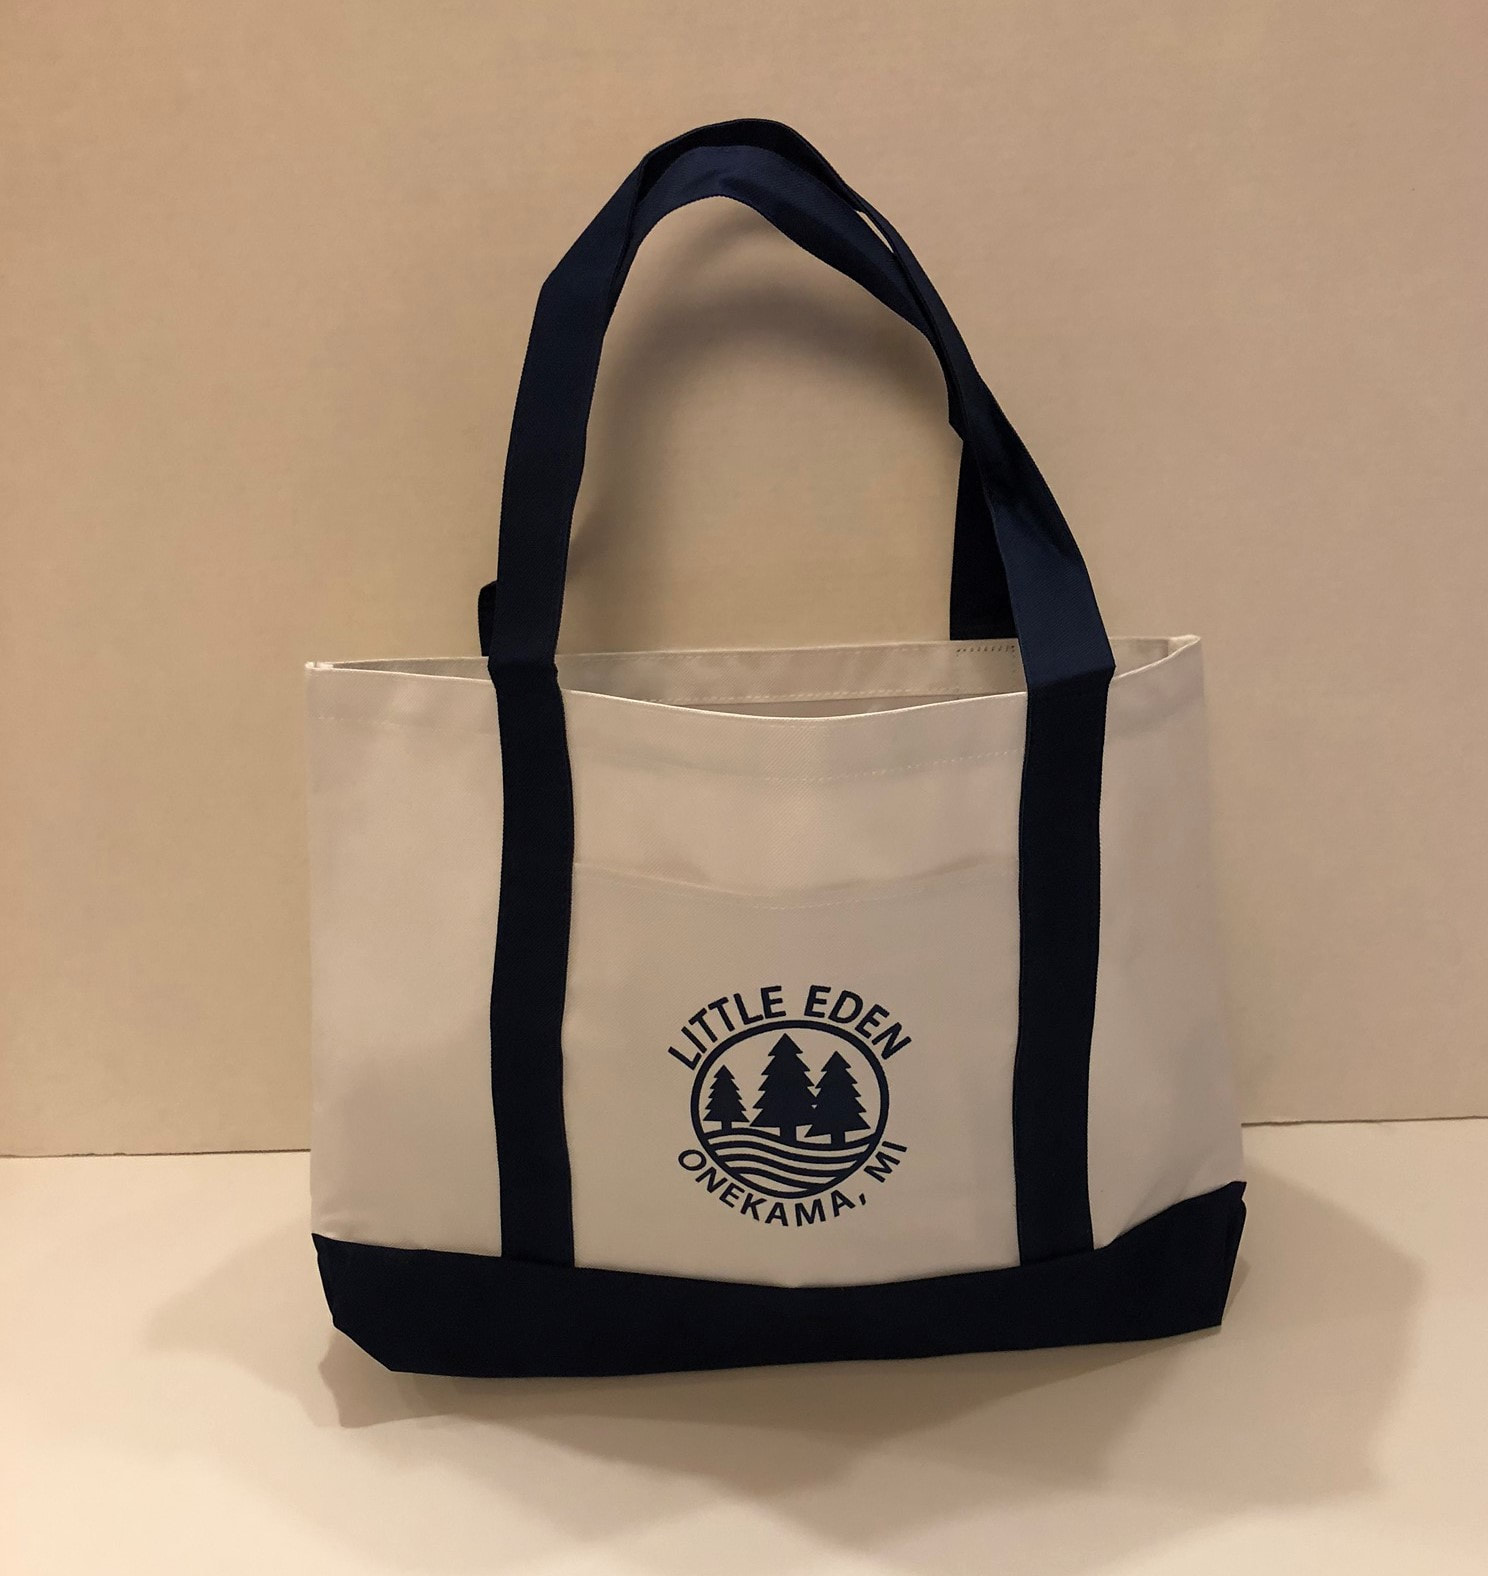 Albums 102+ Pictures Pictures Of Tote Bags Latest